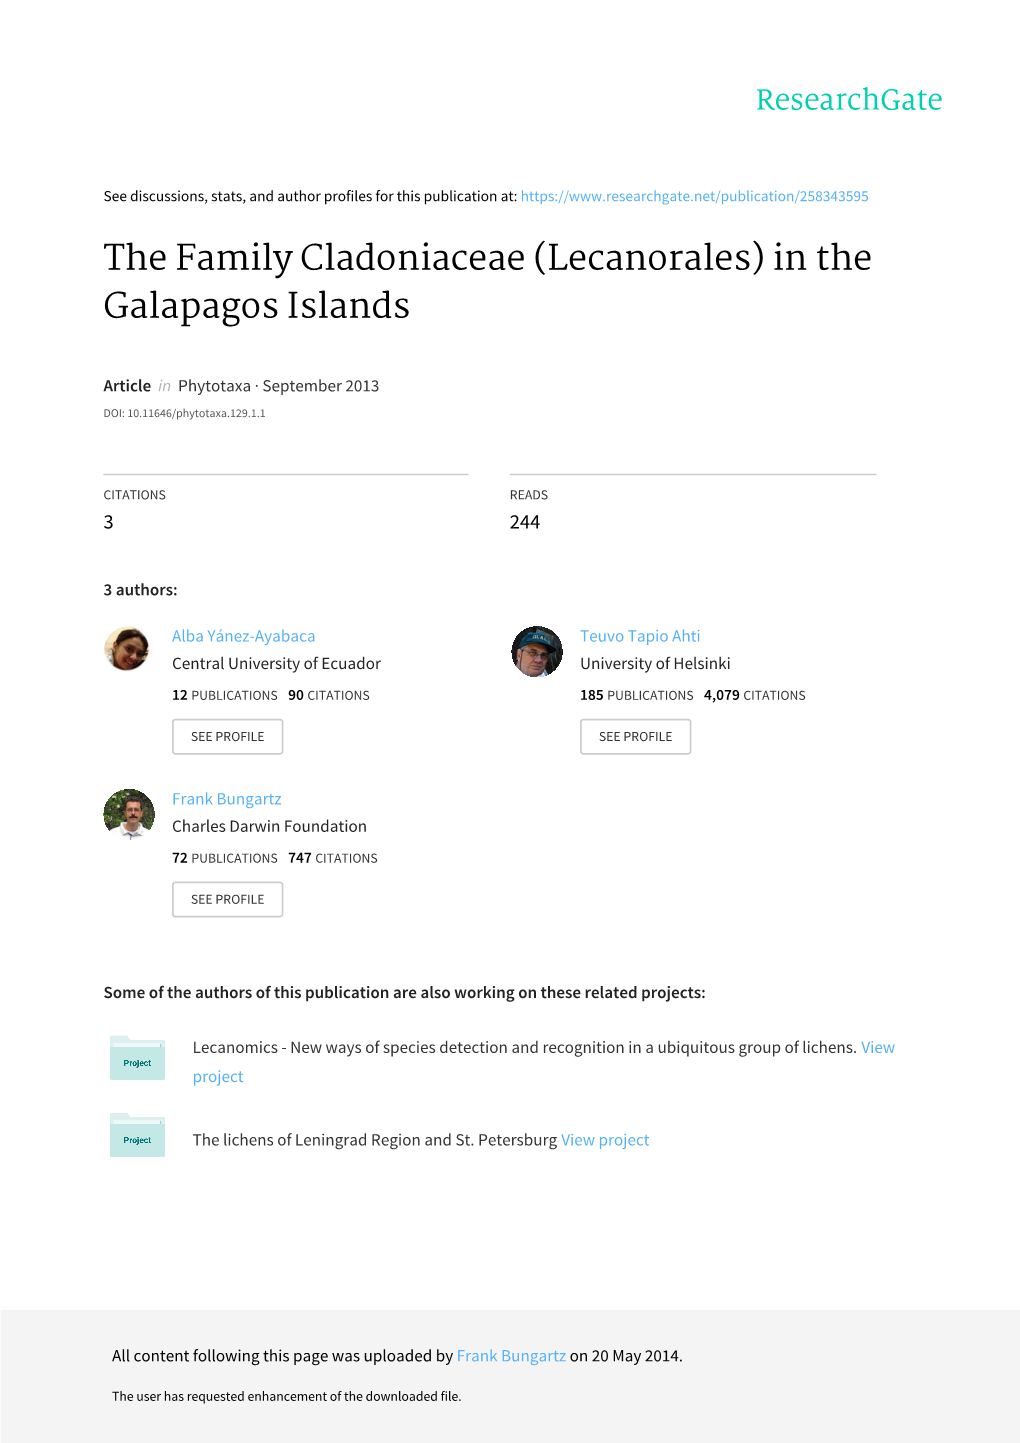 The Family Cladoniaceae (Lecanorales) in the Galapagos Islands